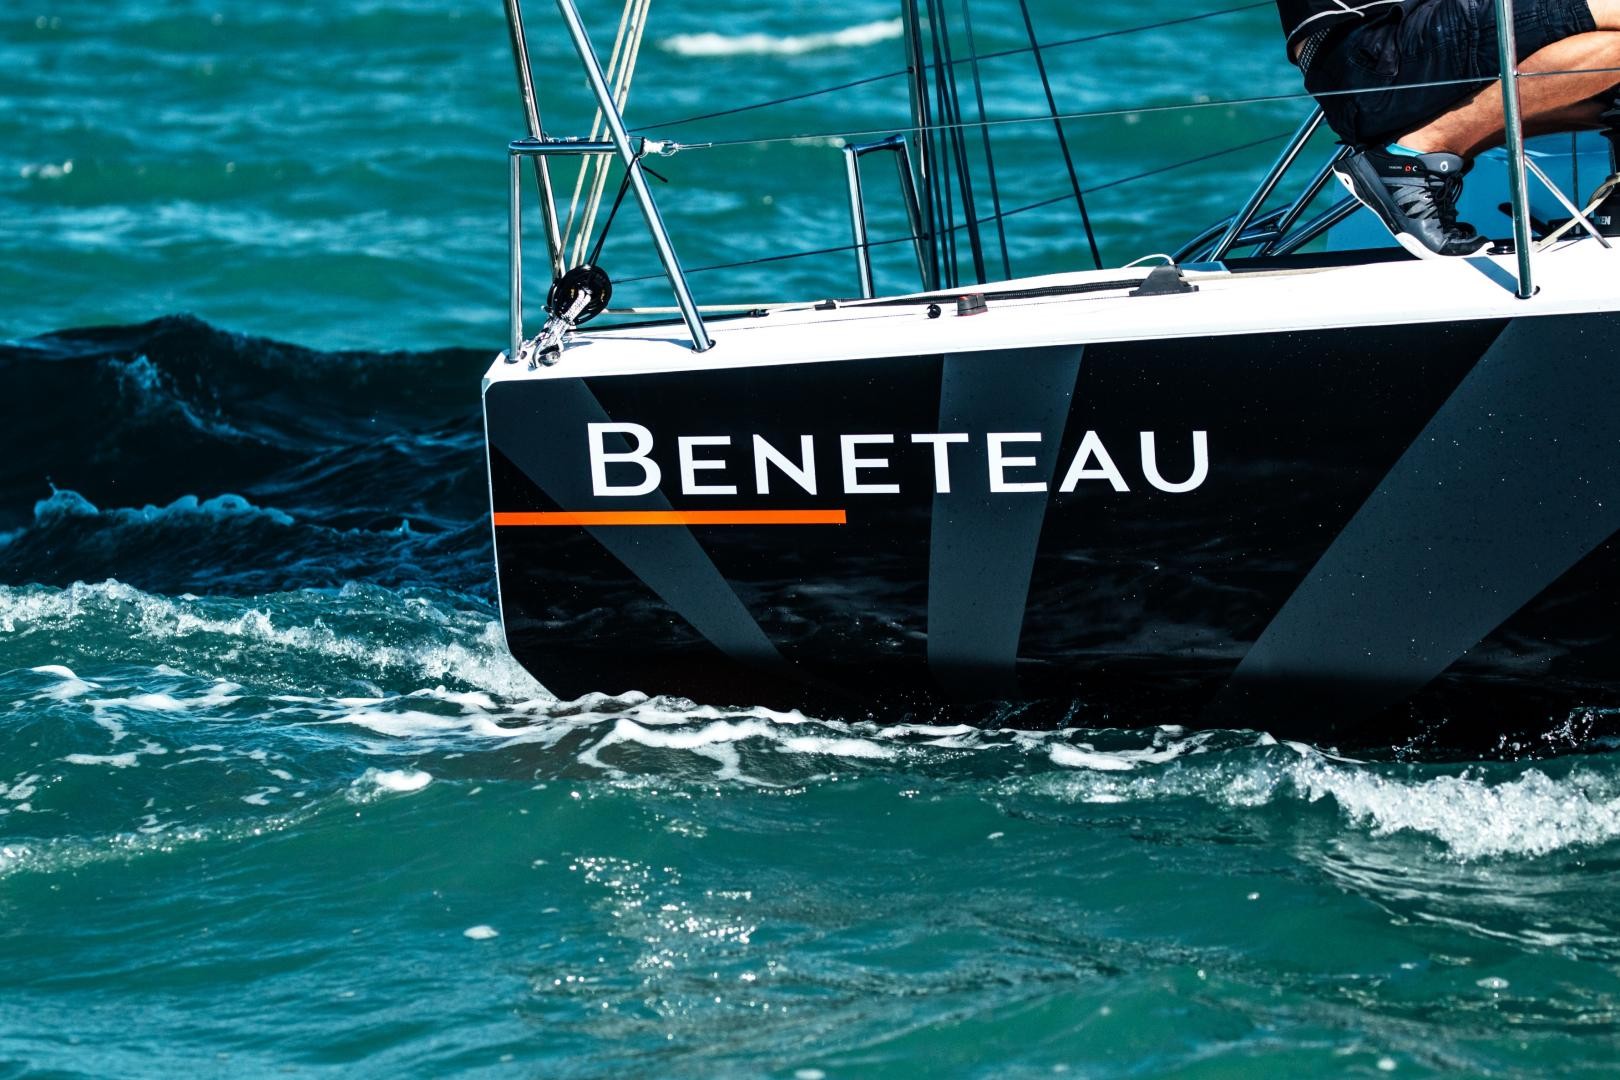 Beneteau shut down its production activities in France and Italy